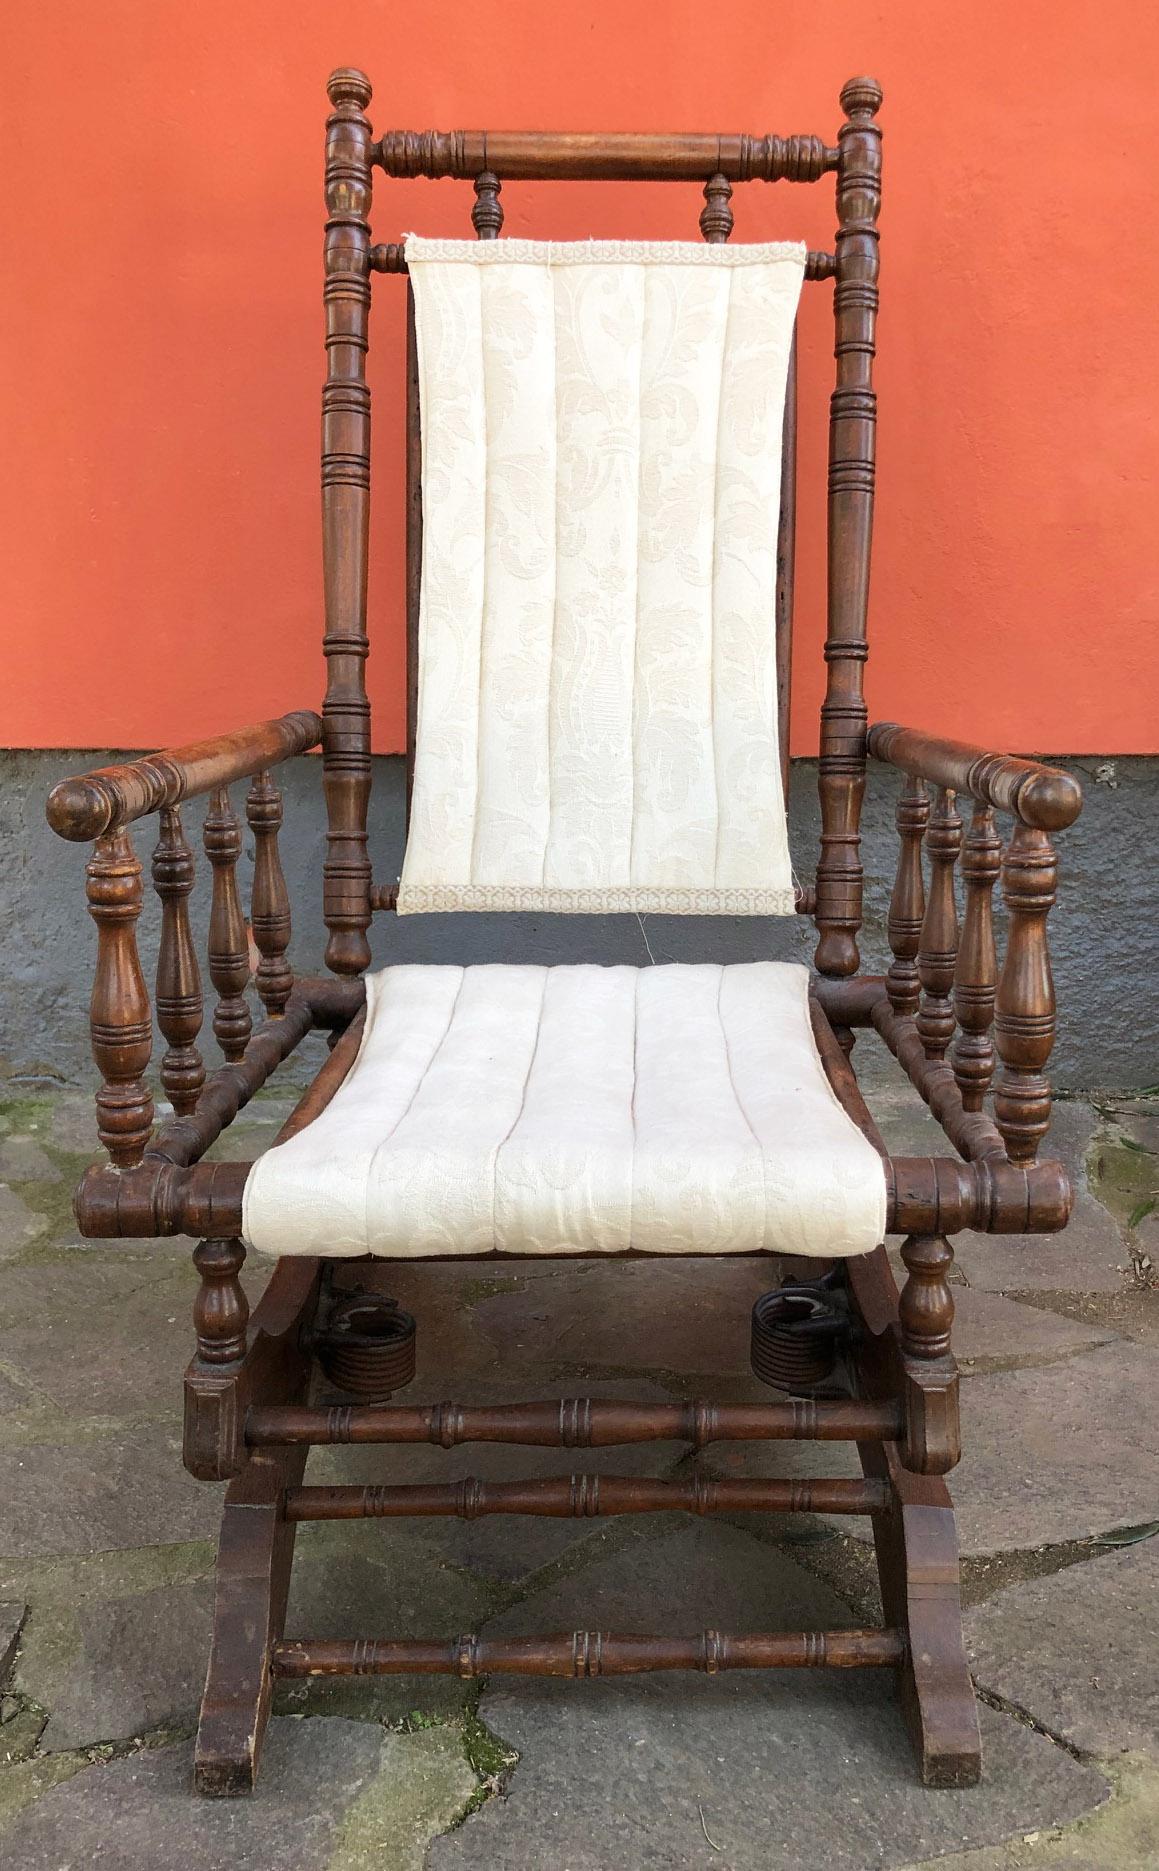 Rocking chair in solid walnut with original springs.
Non Coeval seat and backrest fabric.
The transport quote for the USA and Canada is customized according to the destination, make the request with zip code and city.